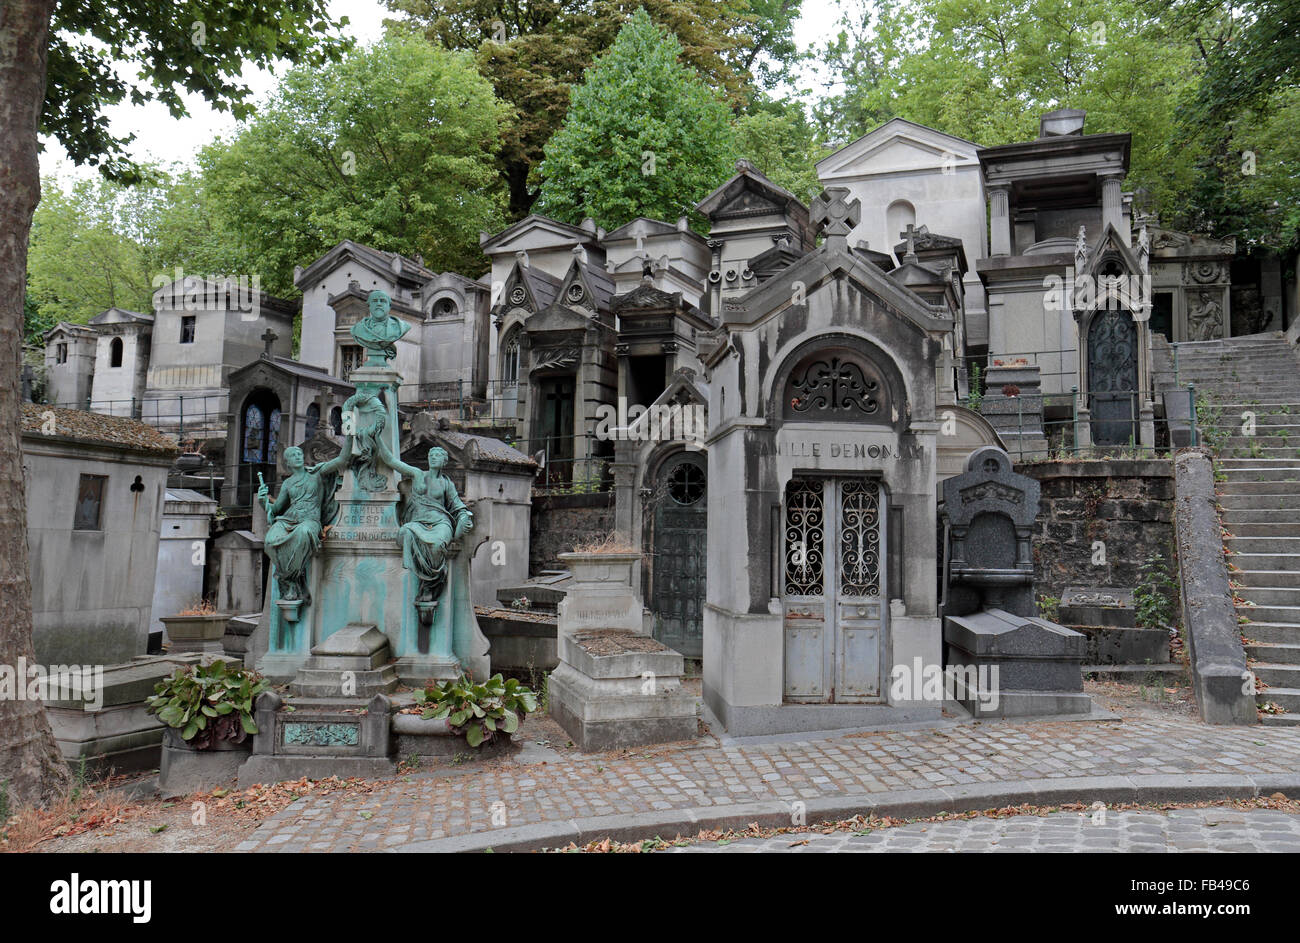 Ornate tombs in the Père Lachaise Cemetery, Paris, France. Stock Photo